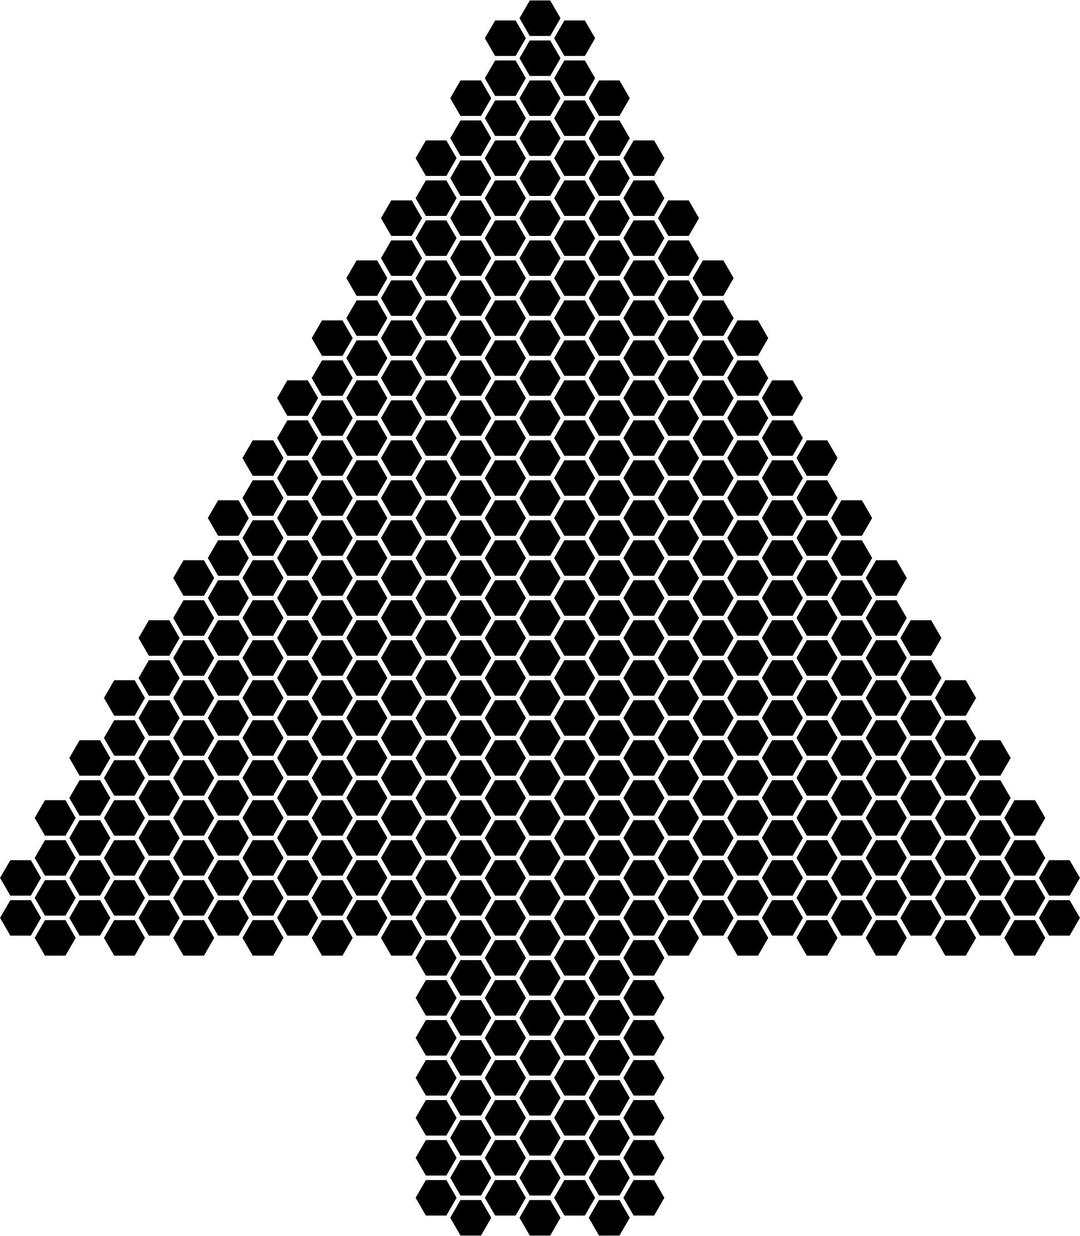 Hexagonal Abstract Christmas Tree png transparent